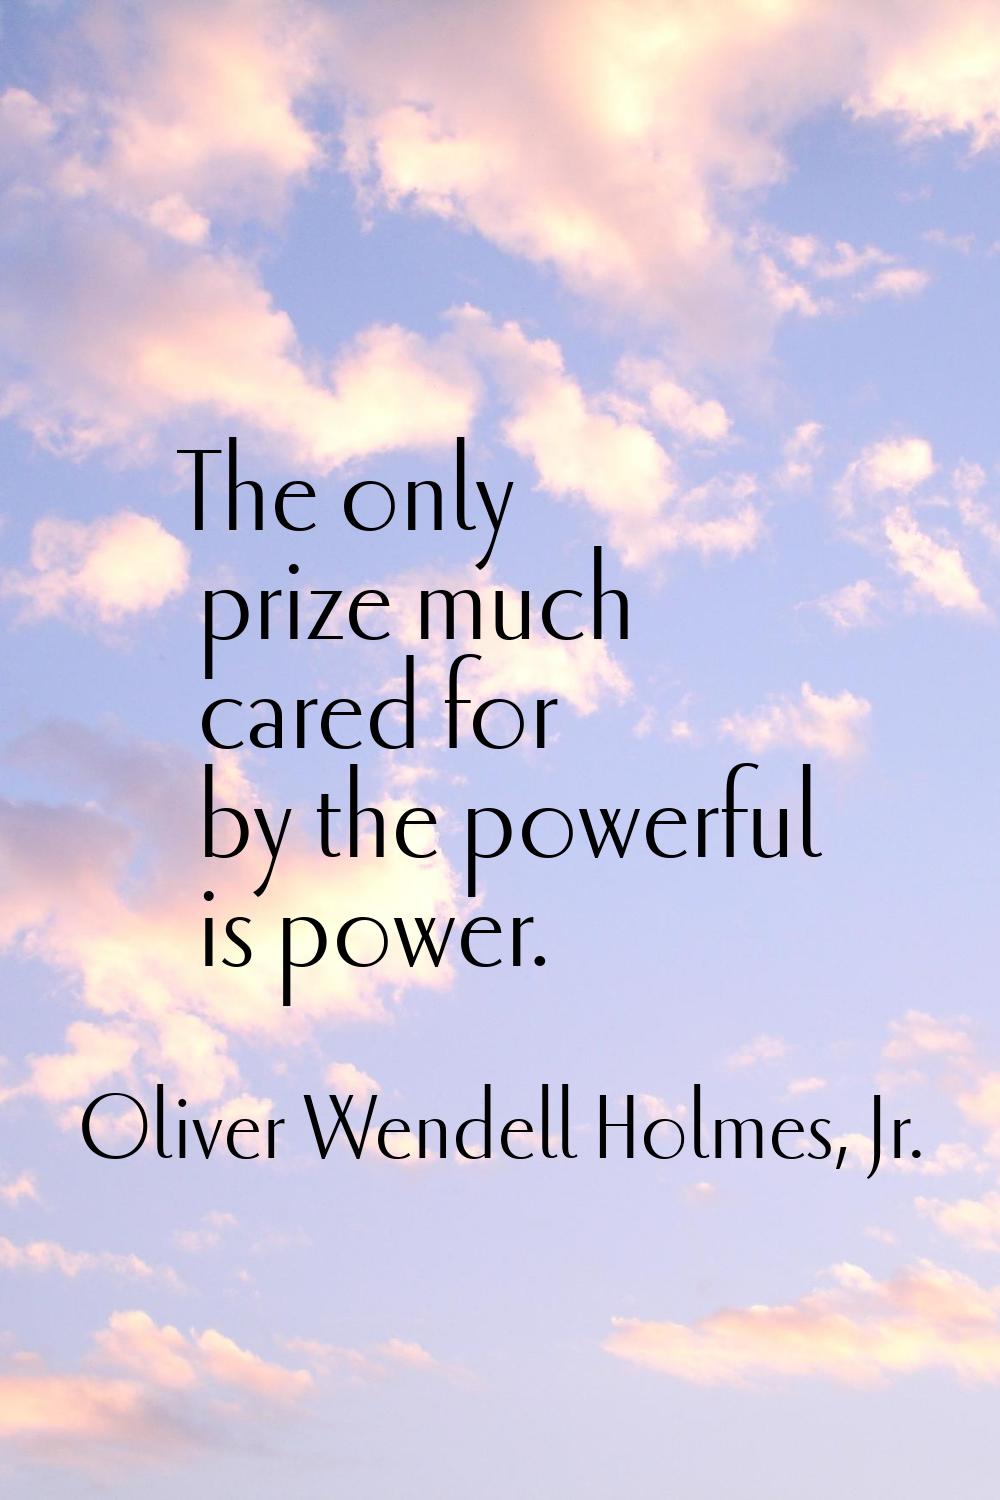 The only prize much cared for by the powerful is power.